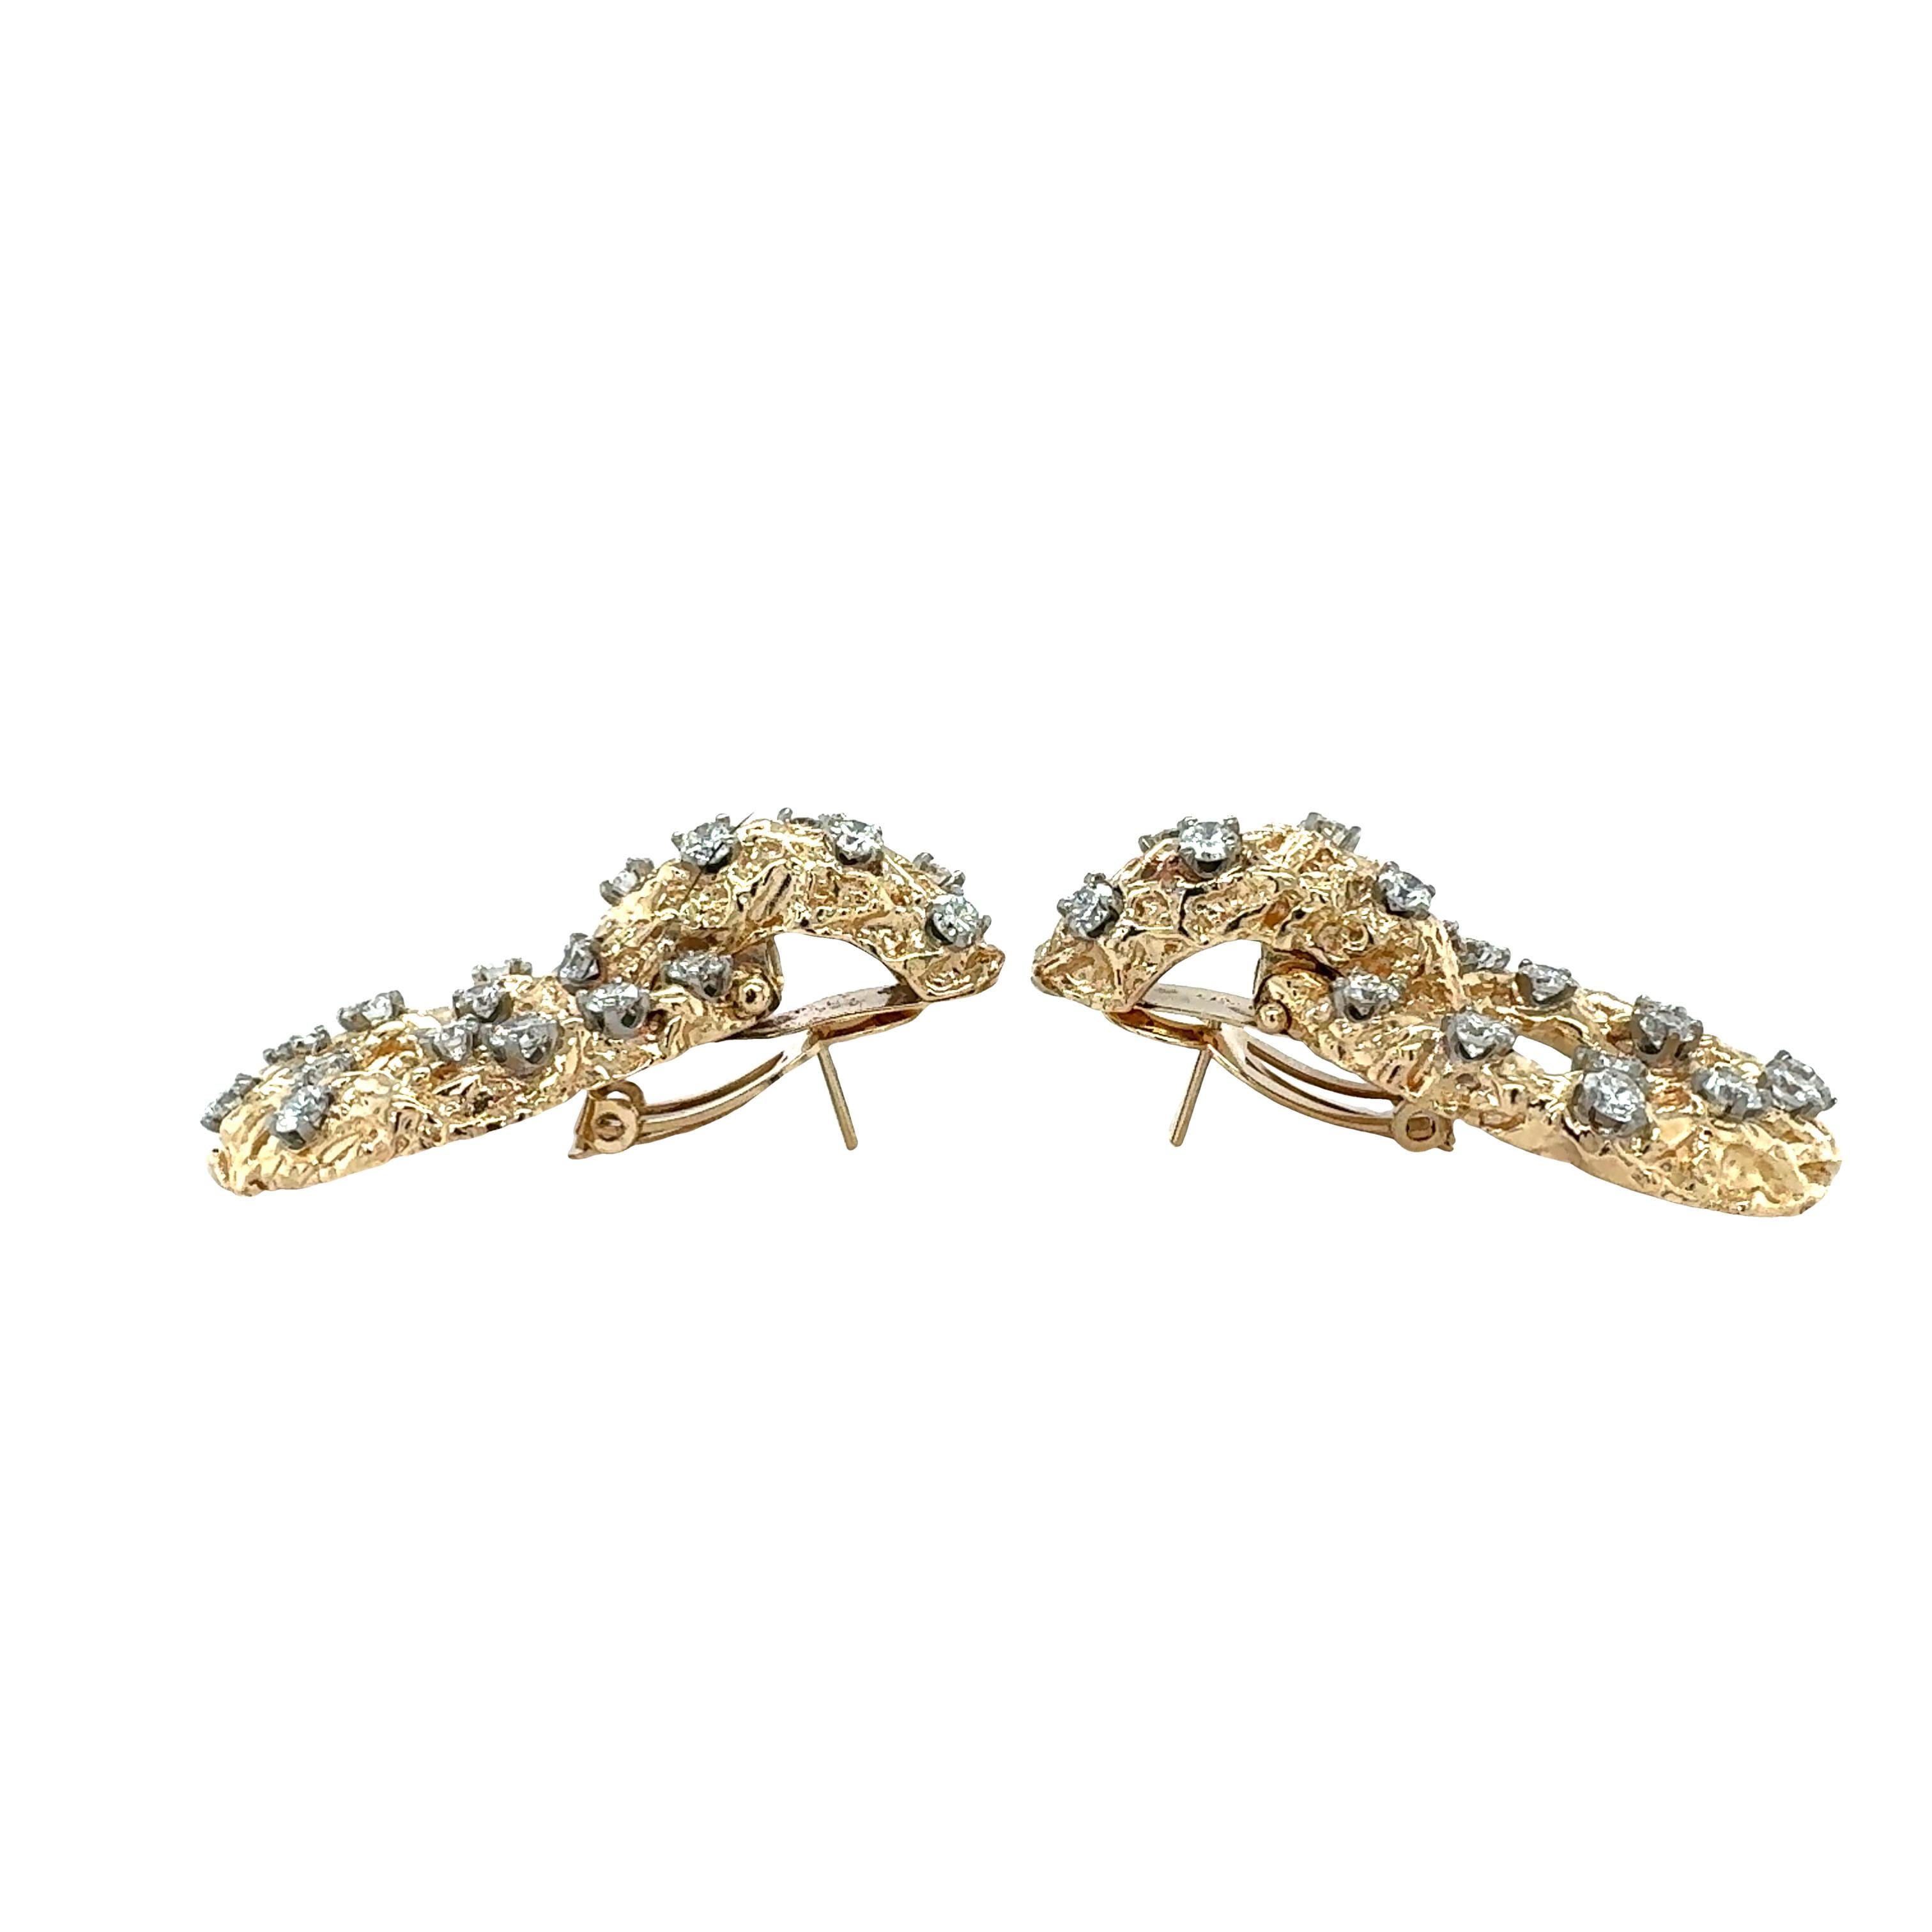 One pair of 14K yellow gold diamond doorknocker earrings featuring 40 round brilliant cut diamonds weighing 4 ct. in total with H-I color and VS-2 clarity. Textured gold finish throughout, with posts and backs.

Metal: 14K Yellow Gold
Gemstone: